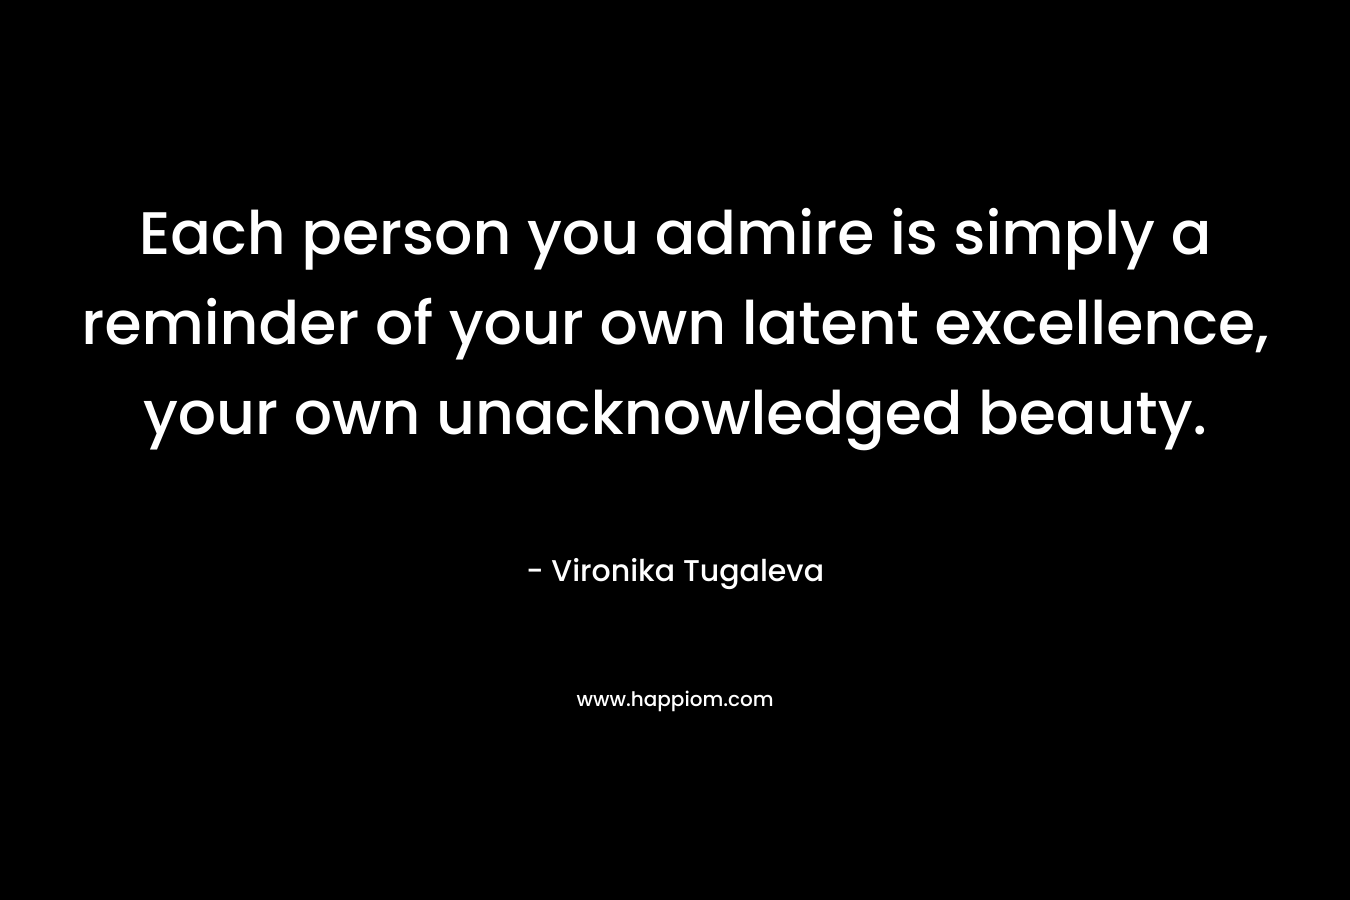 Each person you admire is simply a reminder of your own latent excellence, your own unacknowledged beauty.